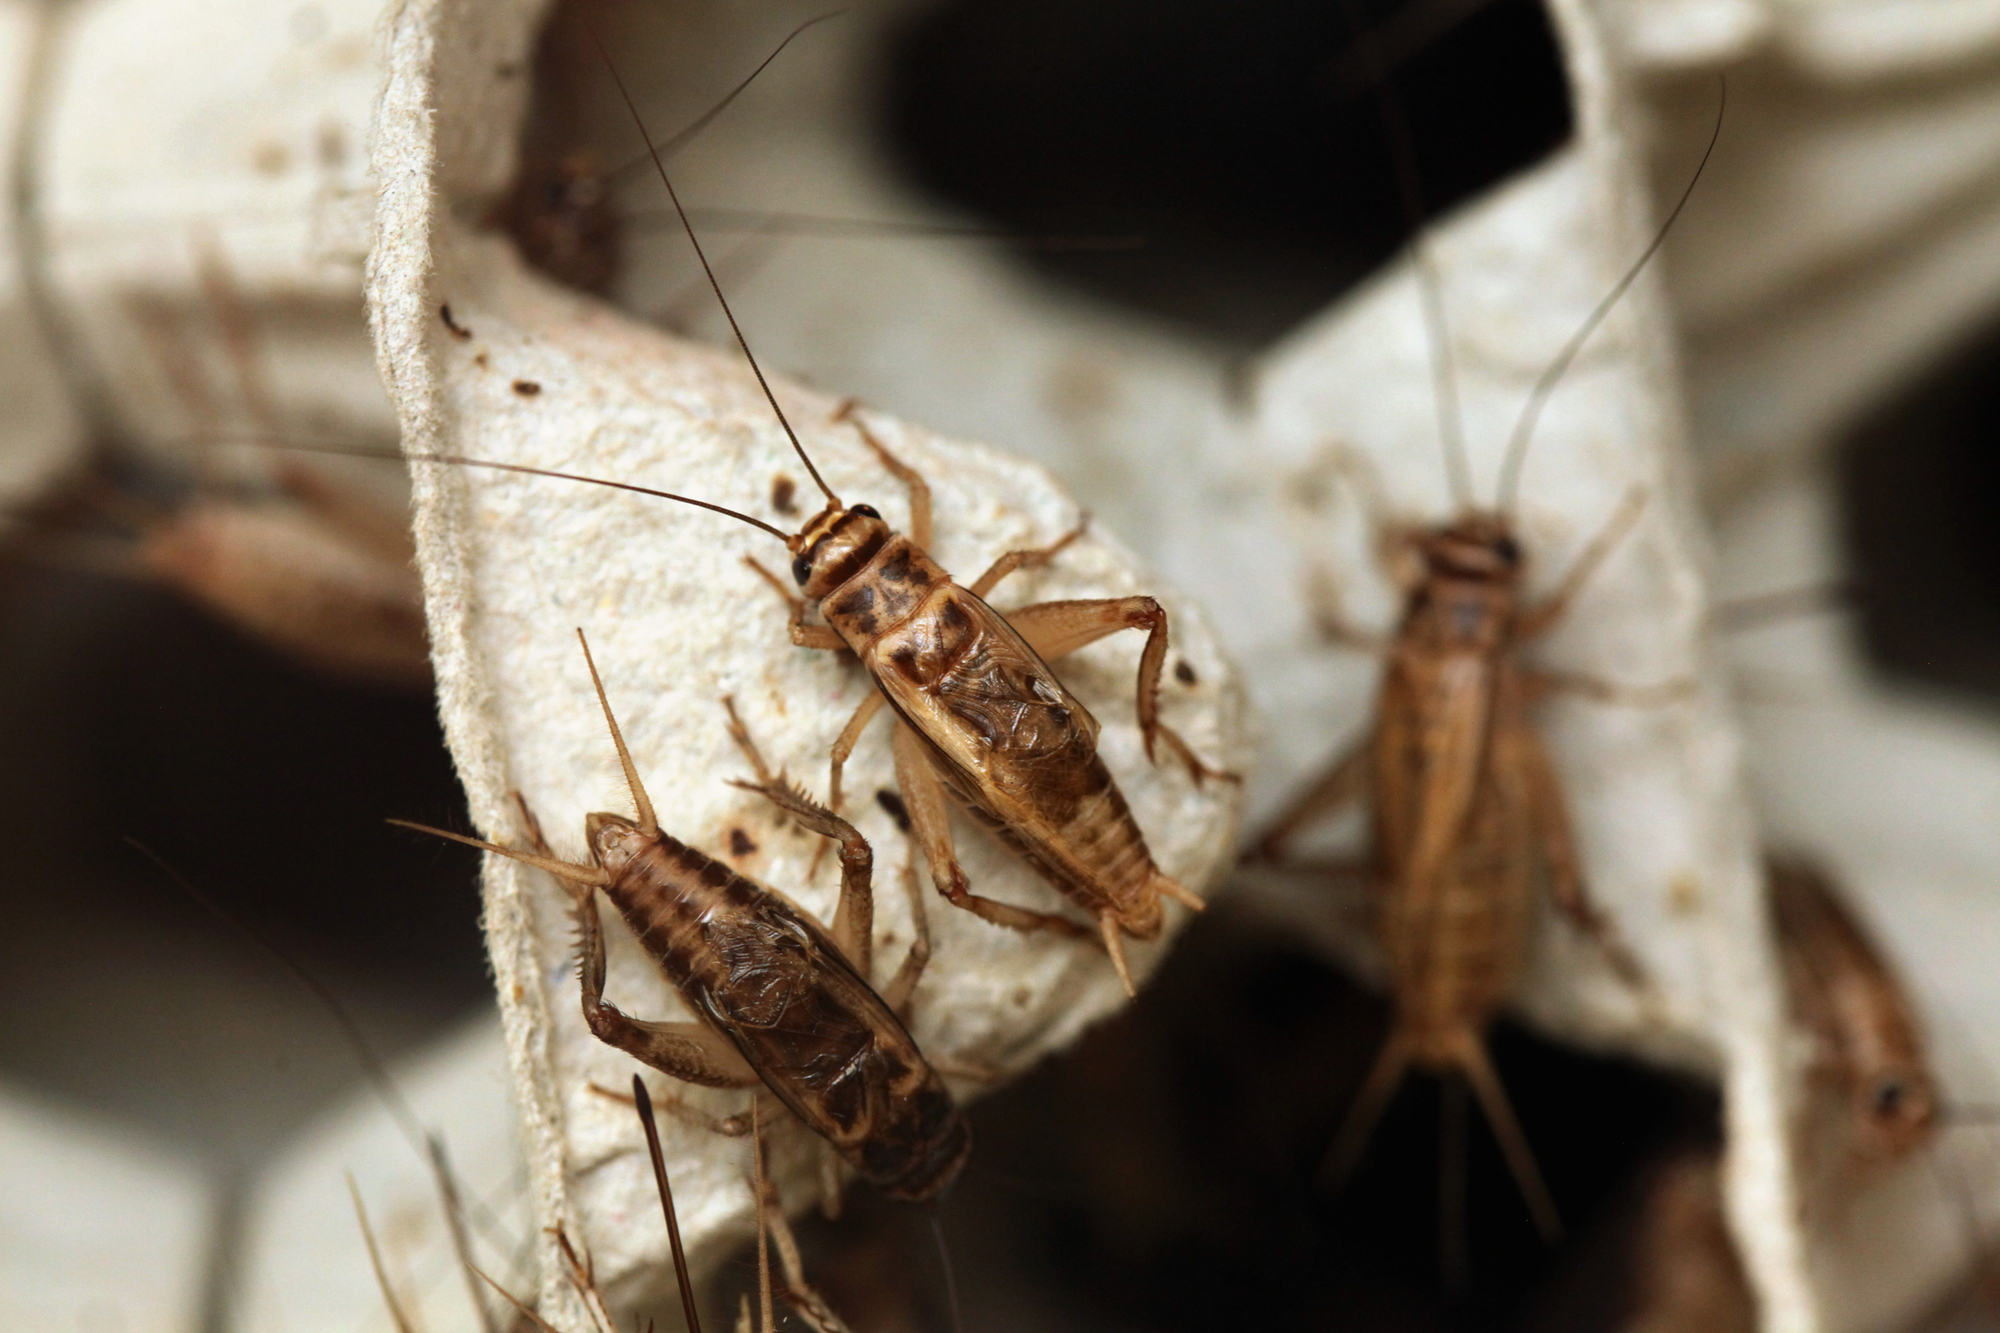 There’s a zombie attack happening right now. It involves crickets.